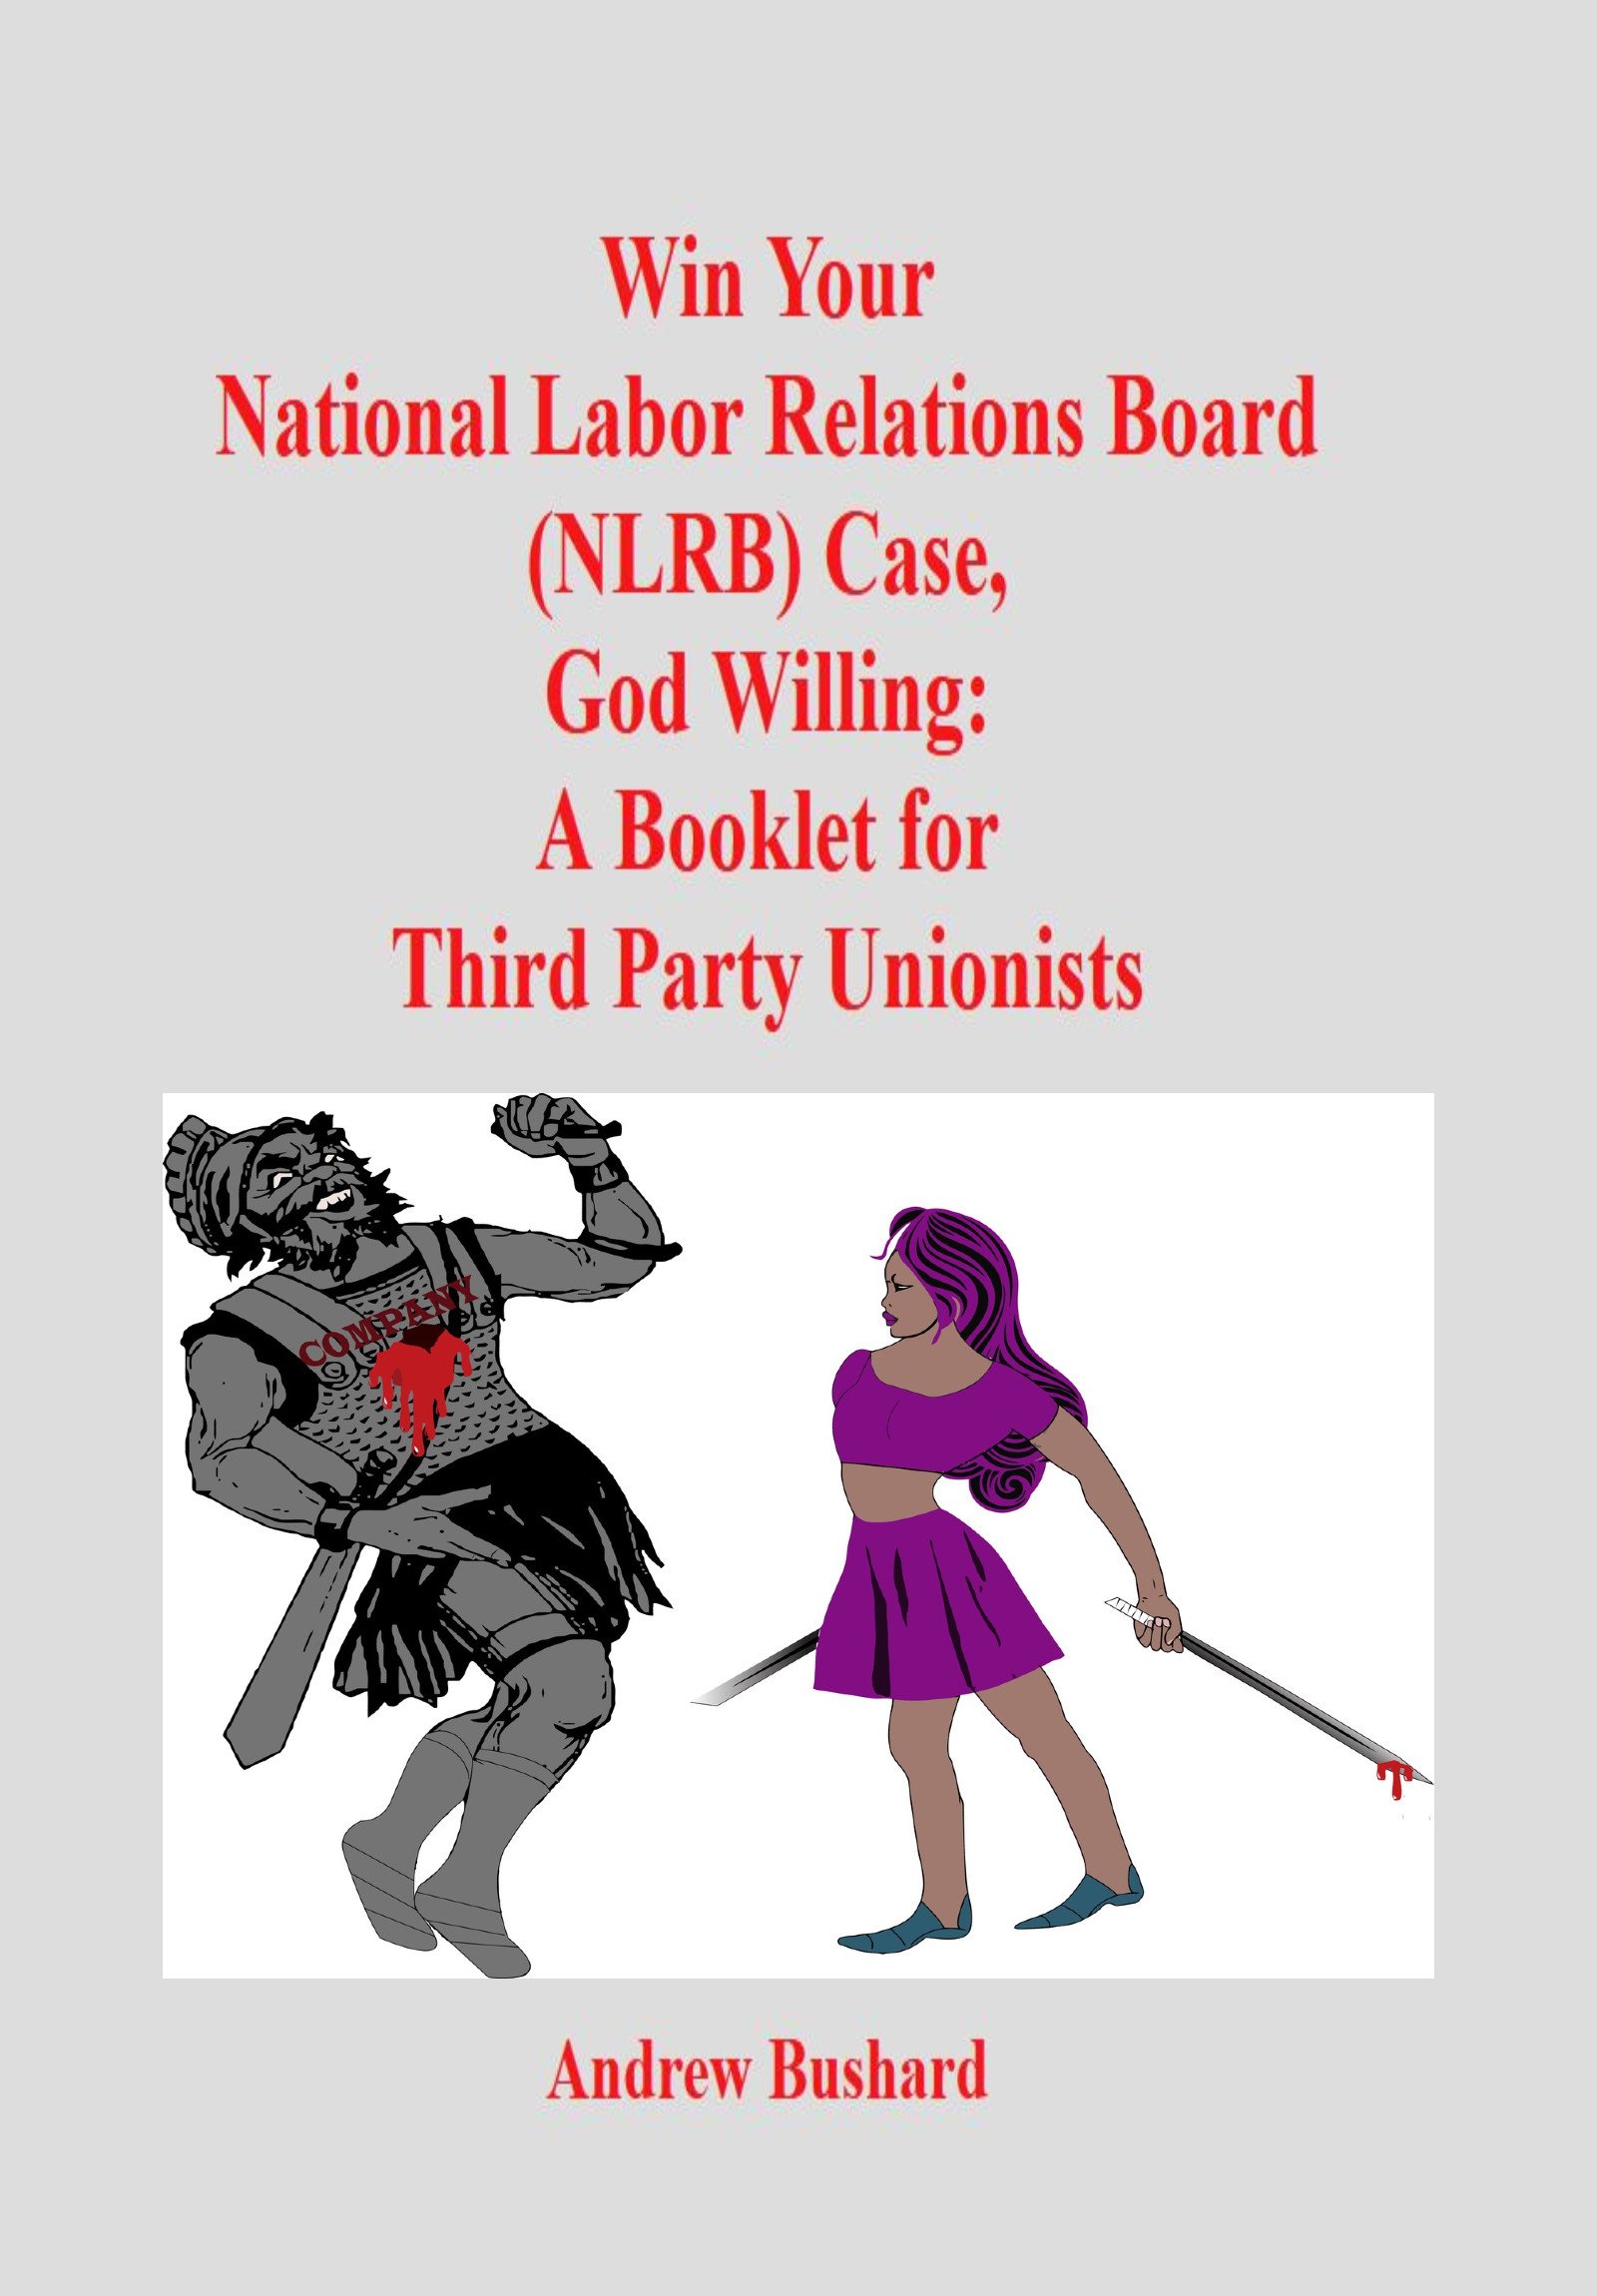 Win Your National Labor Relations Board (NLRB) Case